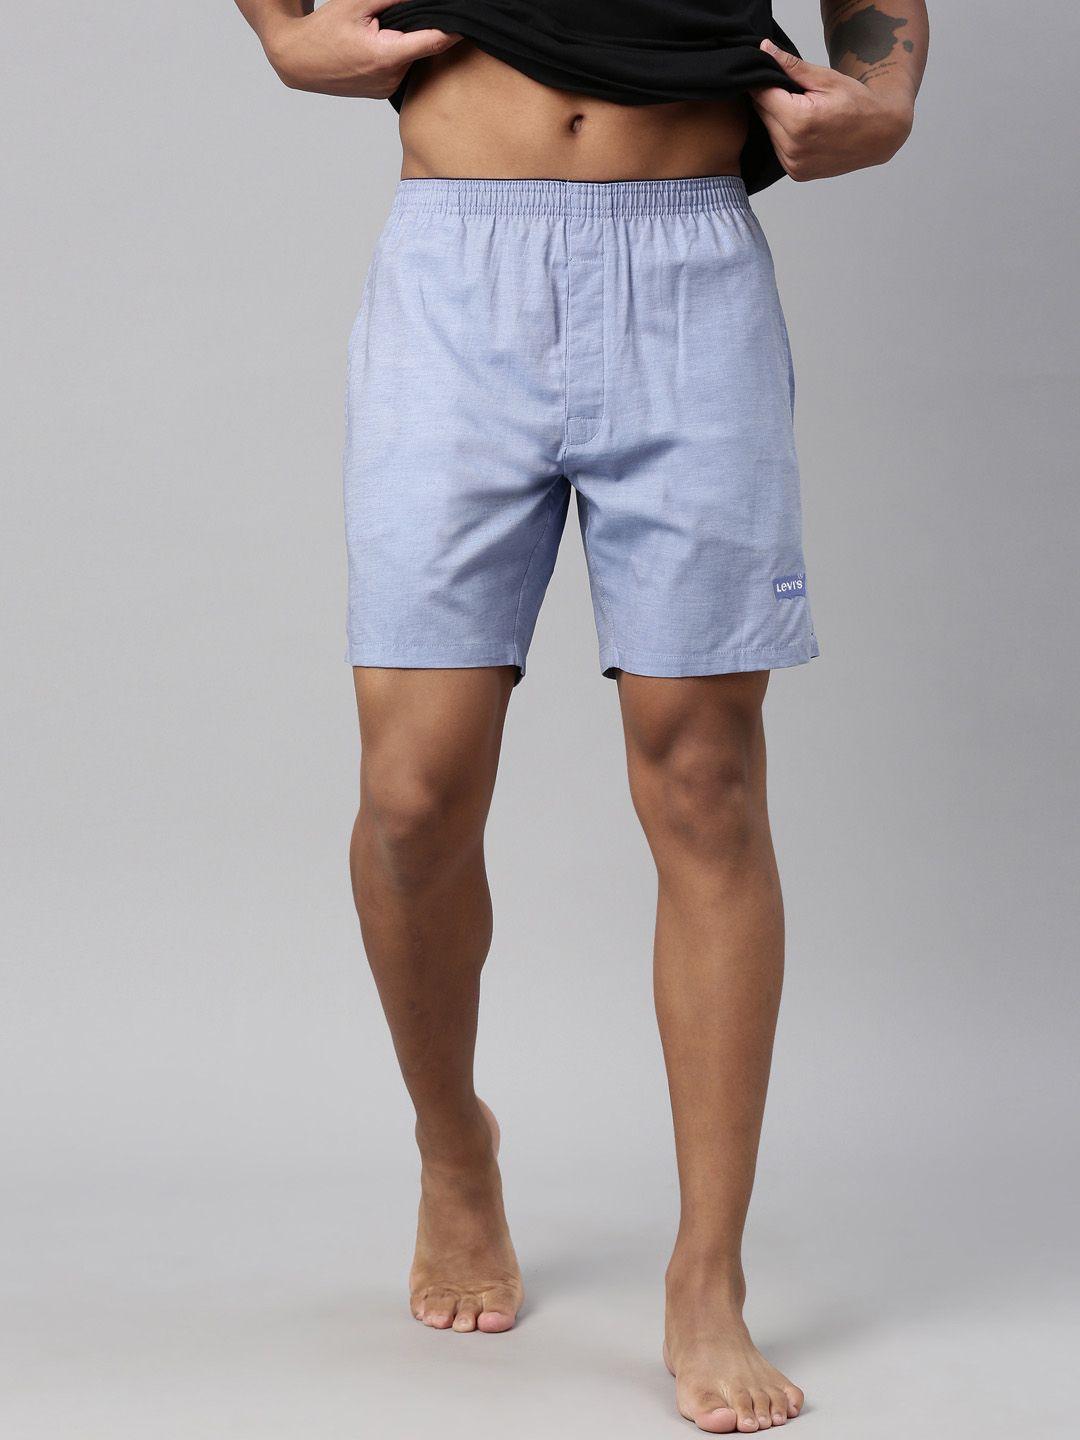 levis-men-smartskin-technology-woven-cotton-boxer-shorts-with-tag-free-comfort-#028